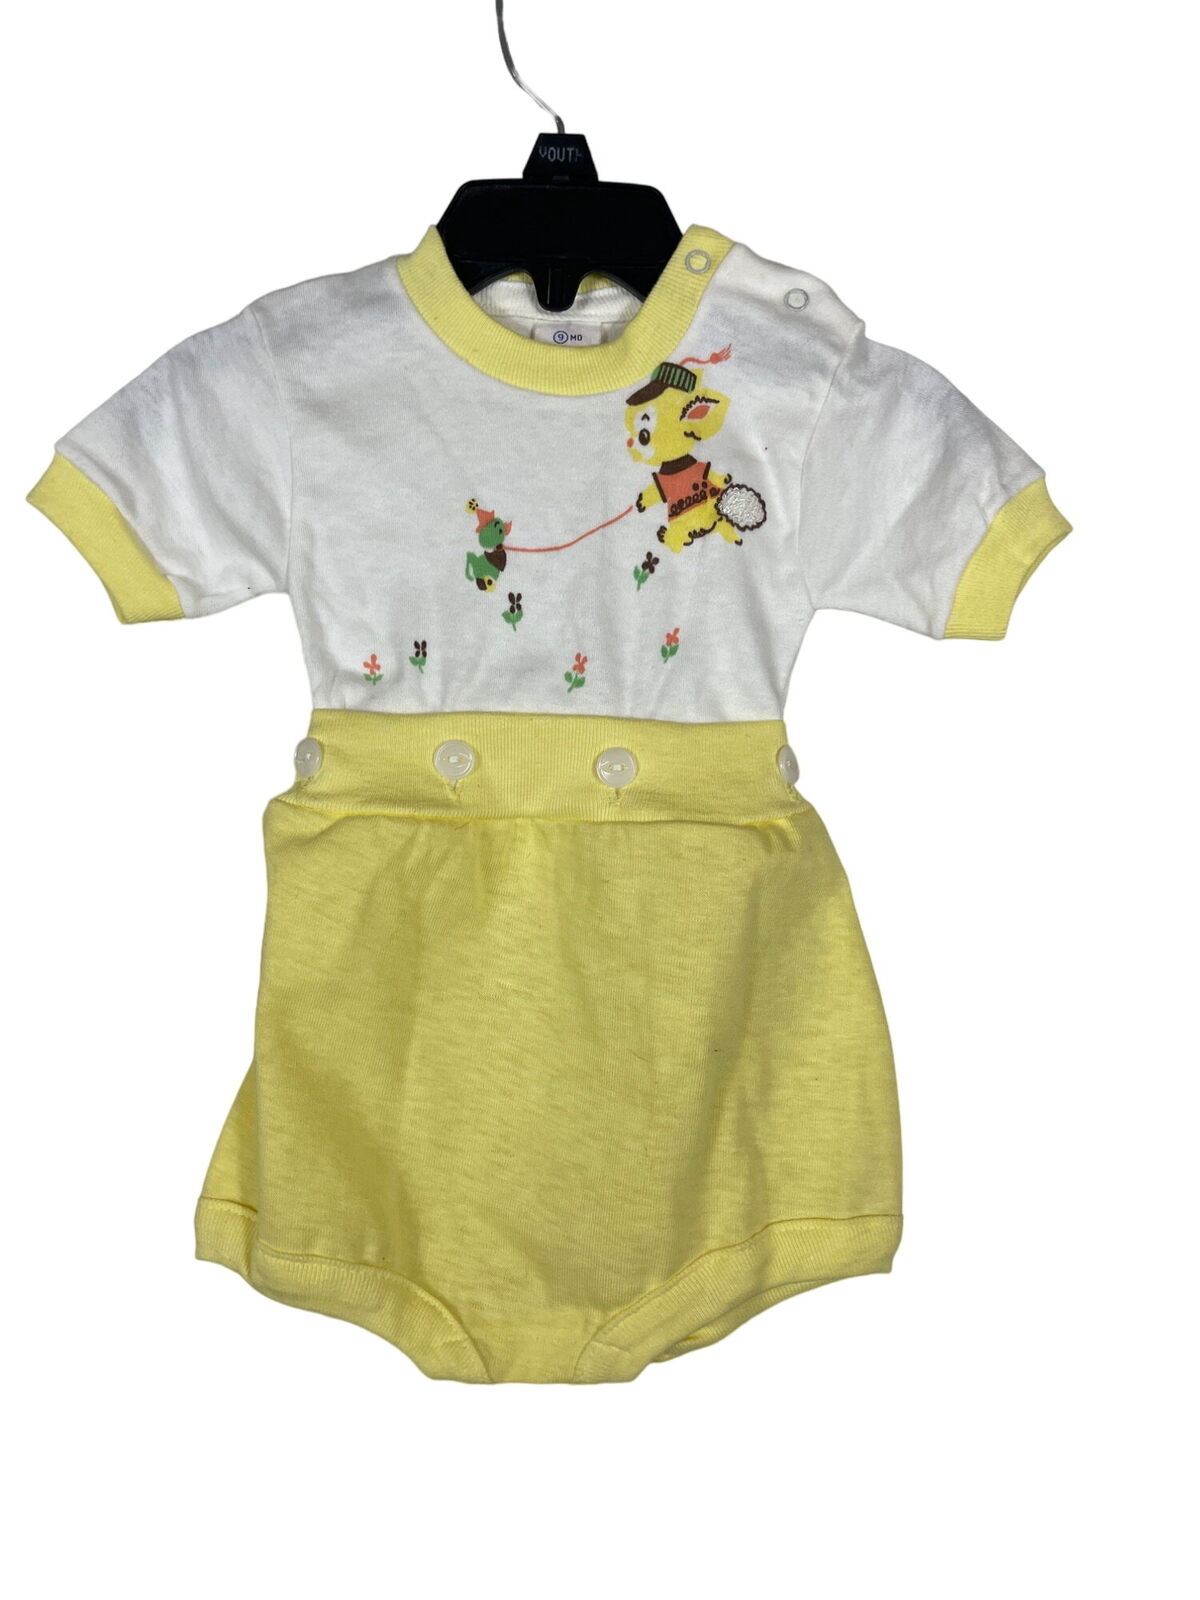 Sterntex Vintage 1970s Baby Infant Outfit Size 9 Months Yellow Romper